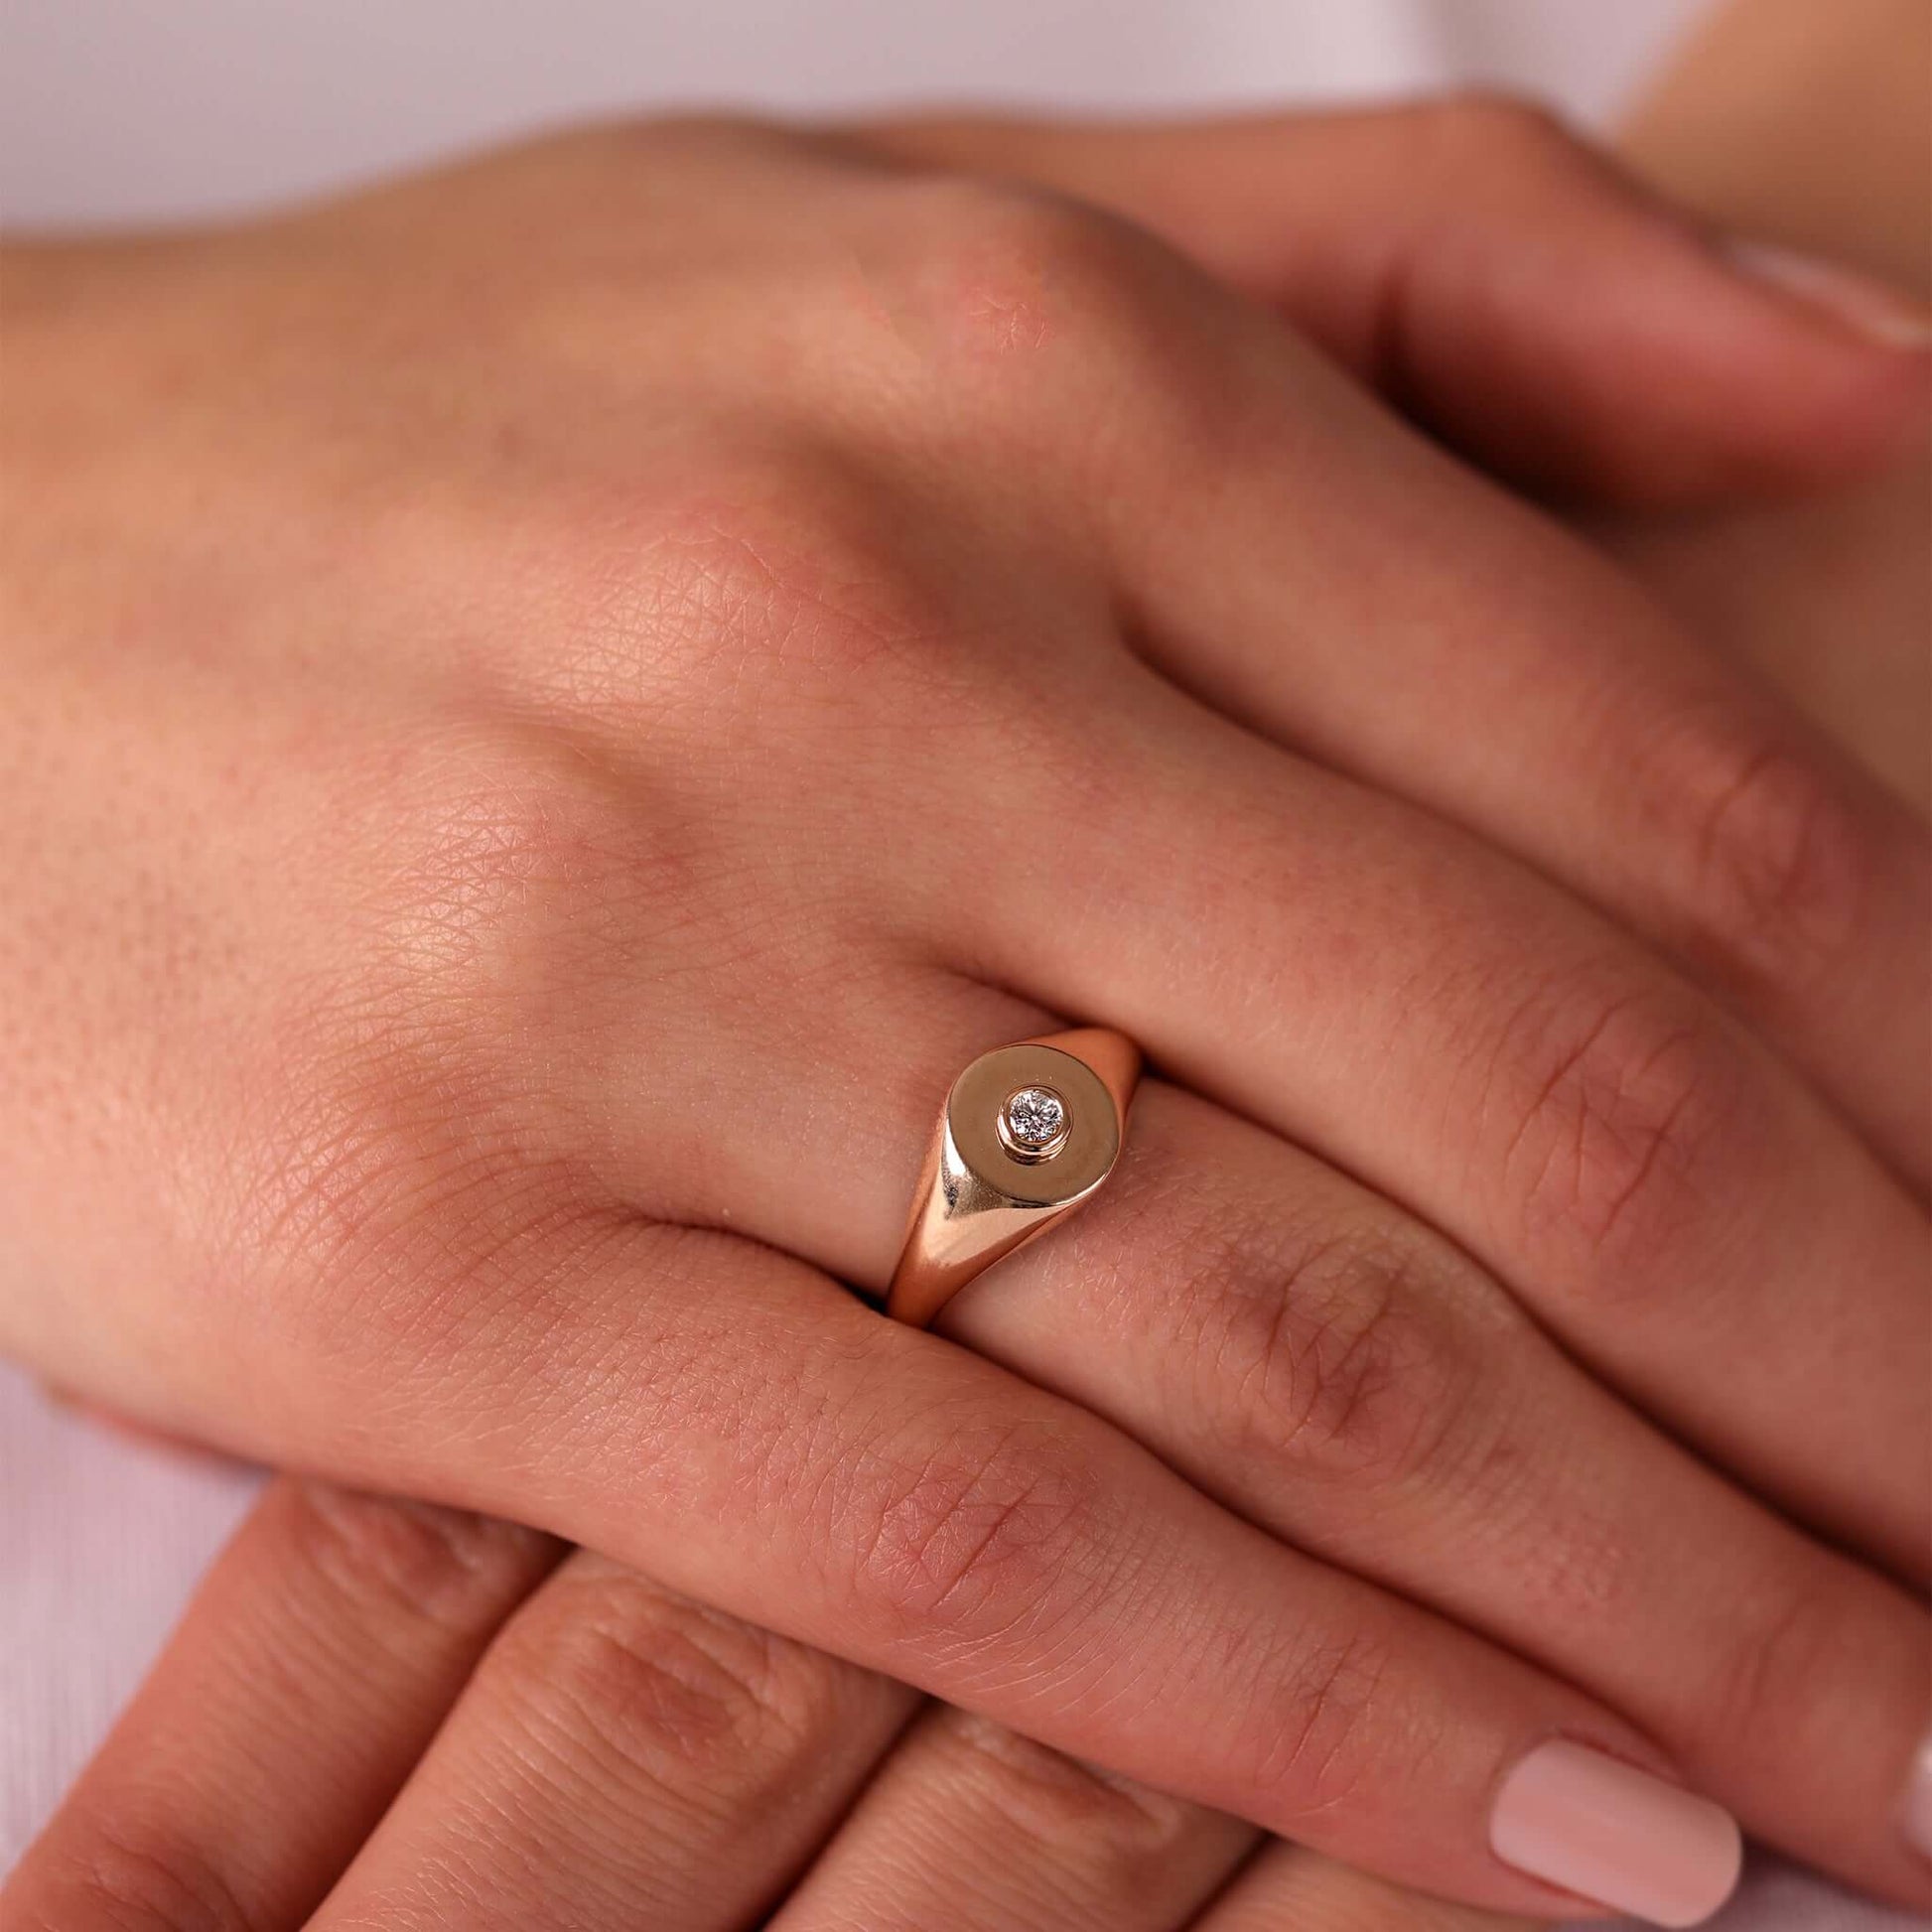 Jewelry Minnies | Diamond Ring | 0.08 Cts. | 14K Gold - ring Zengoda Shop online from Artisan Brands